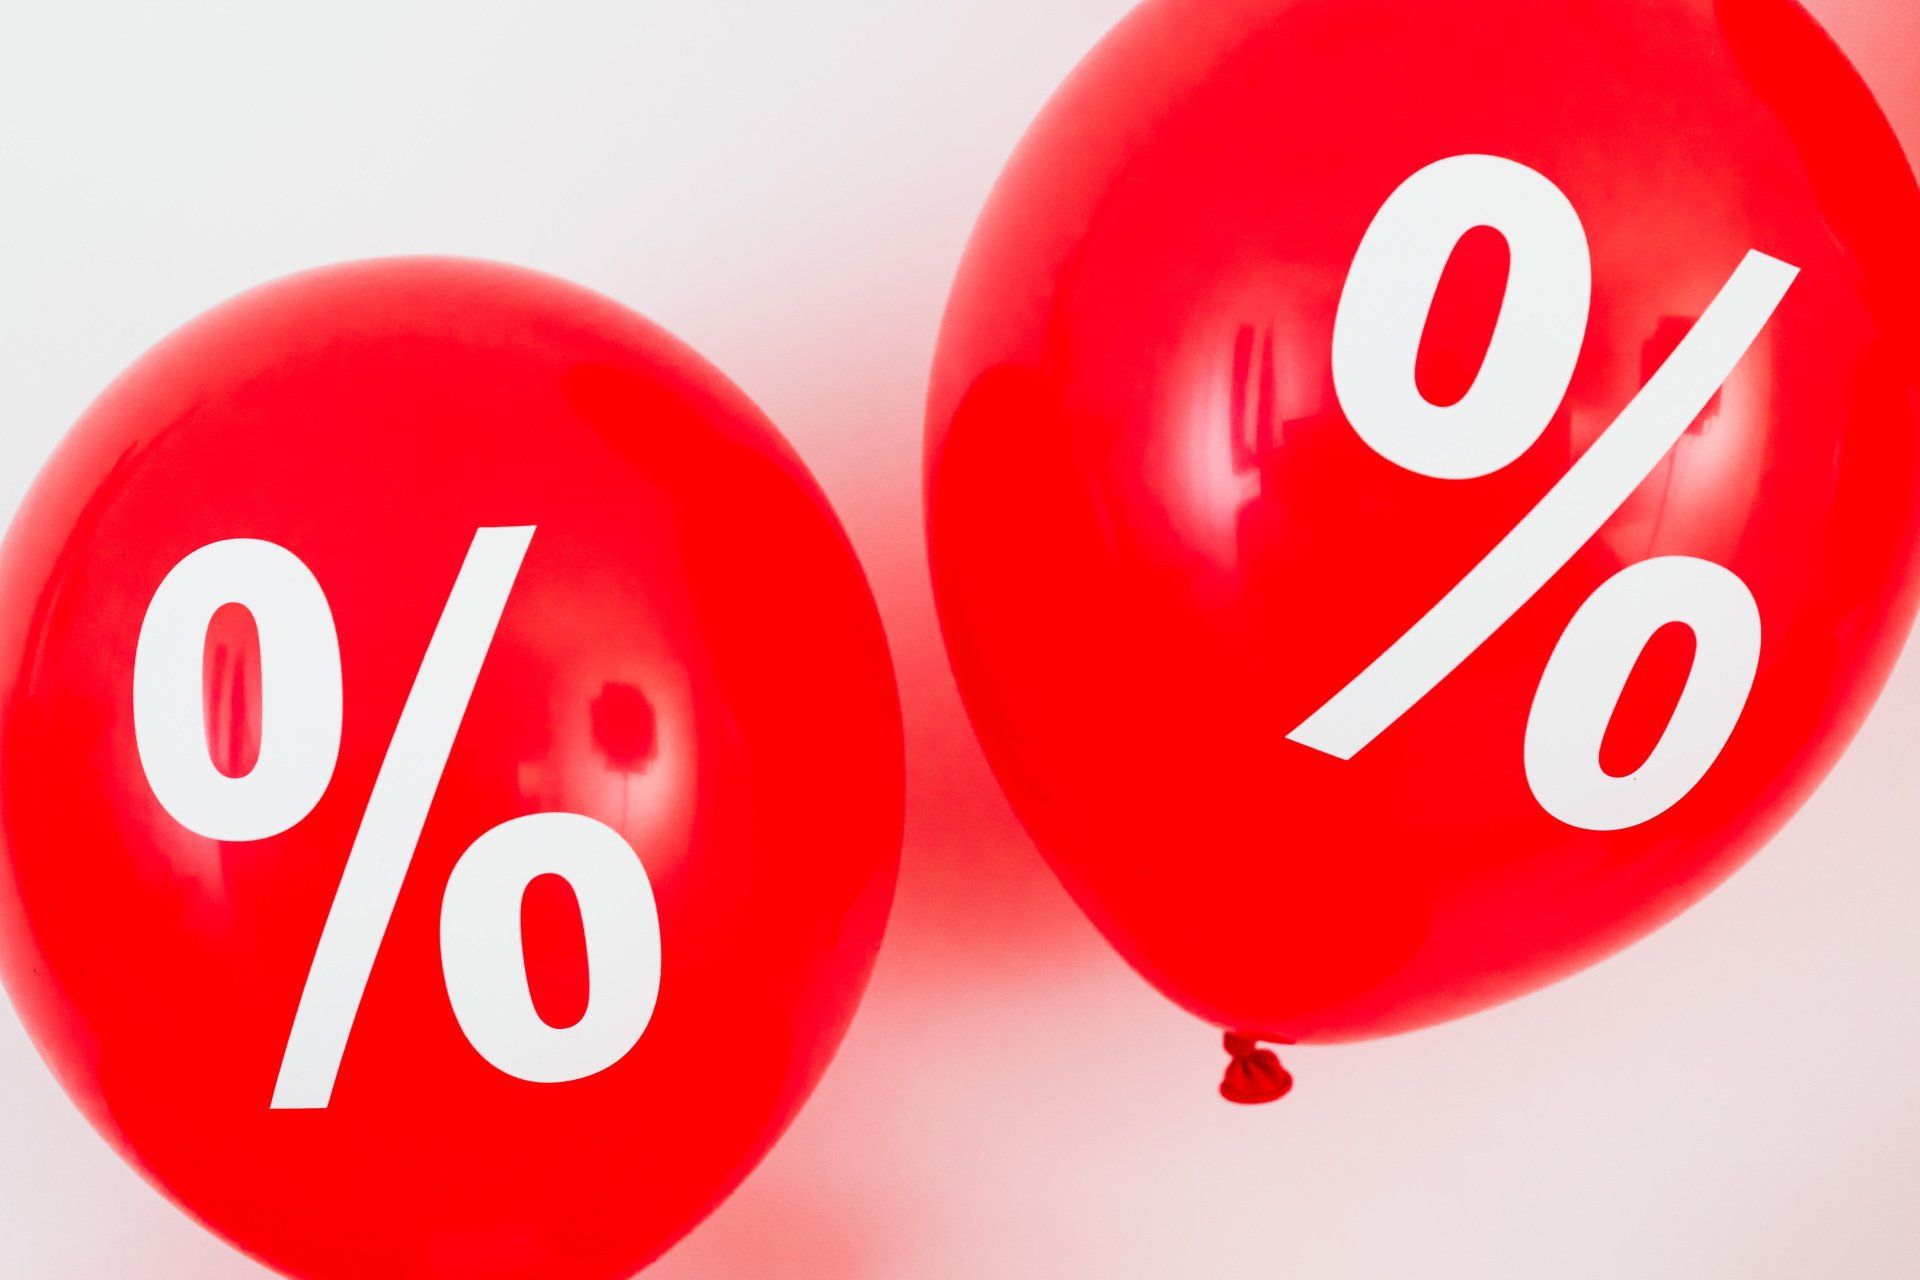 two red balloons with percent symbols on them